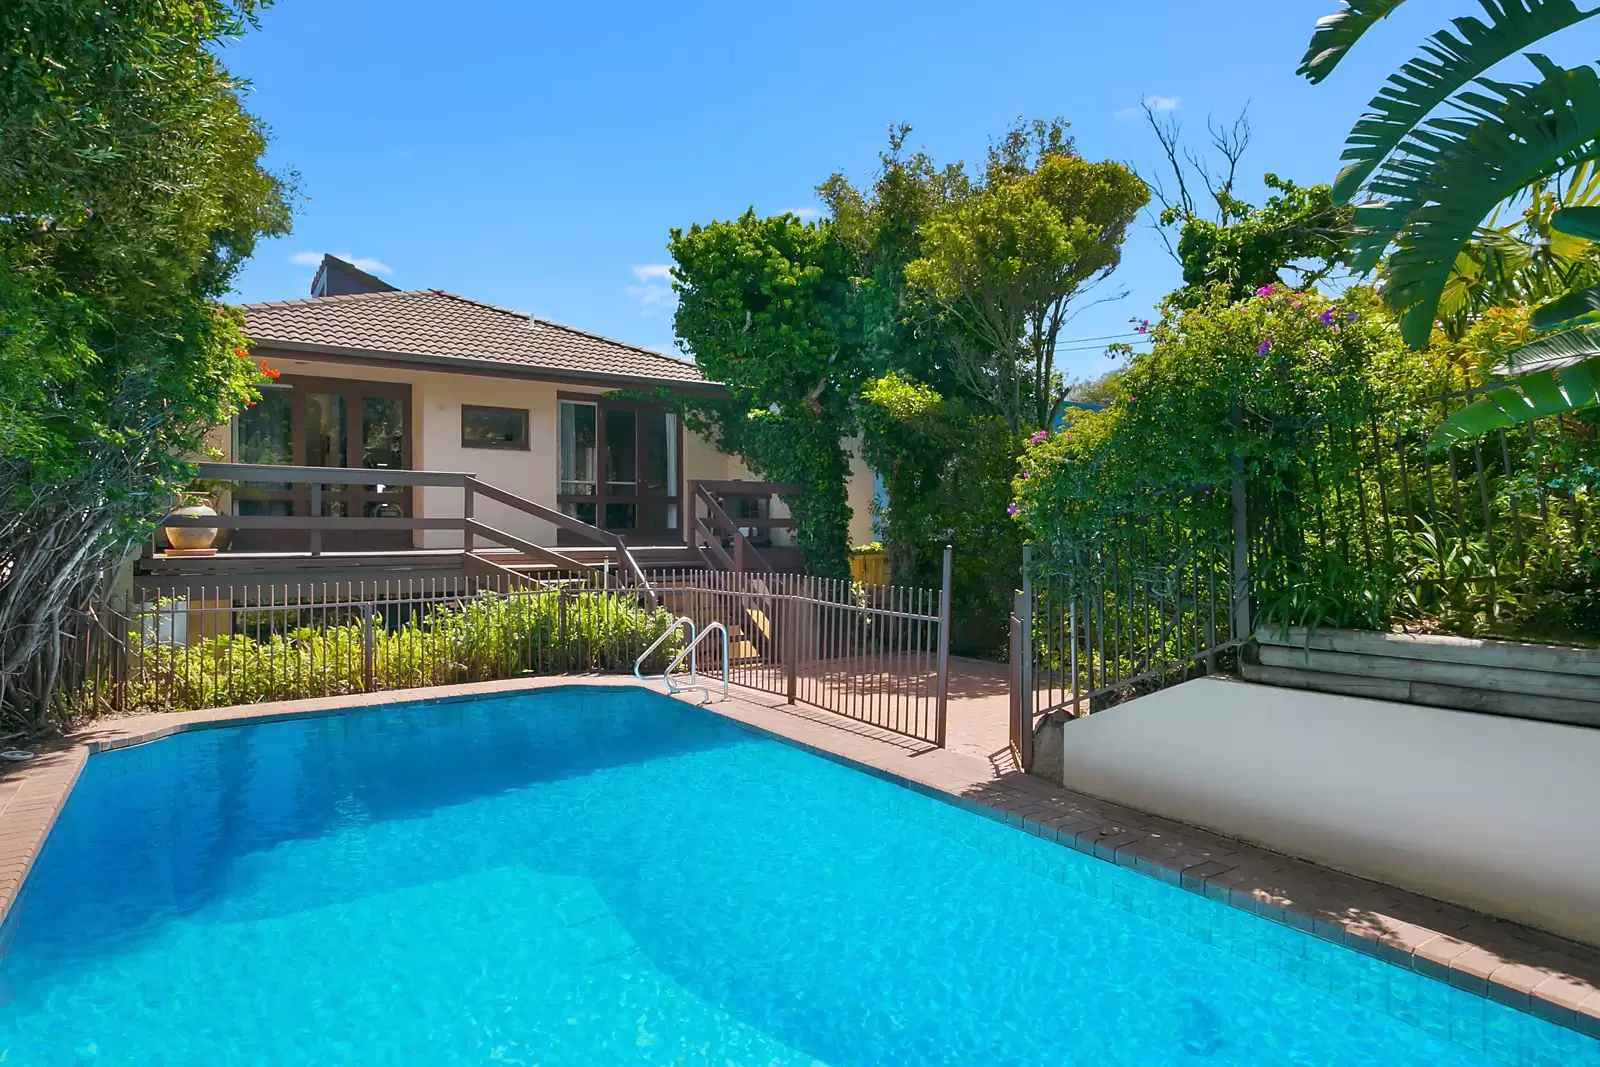 Photo #10: 4 Portland Street, Dover Heights - Sold by Sydney Sotheby's International Realty